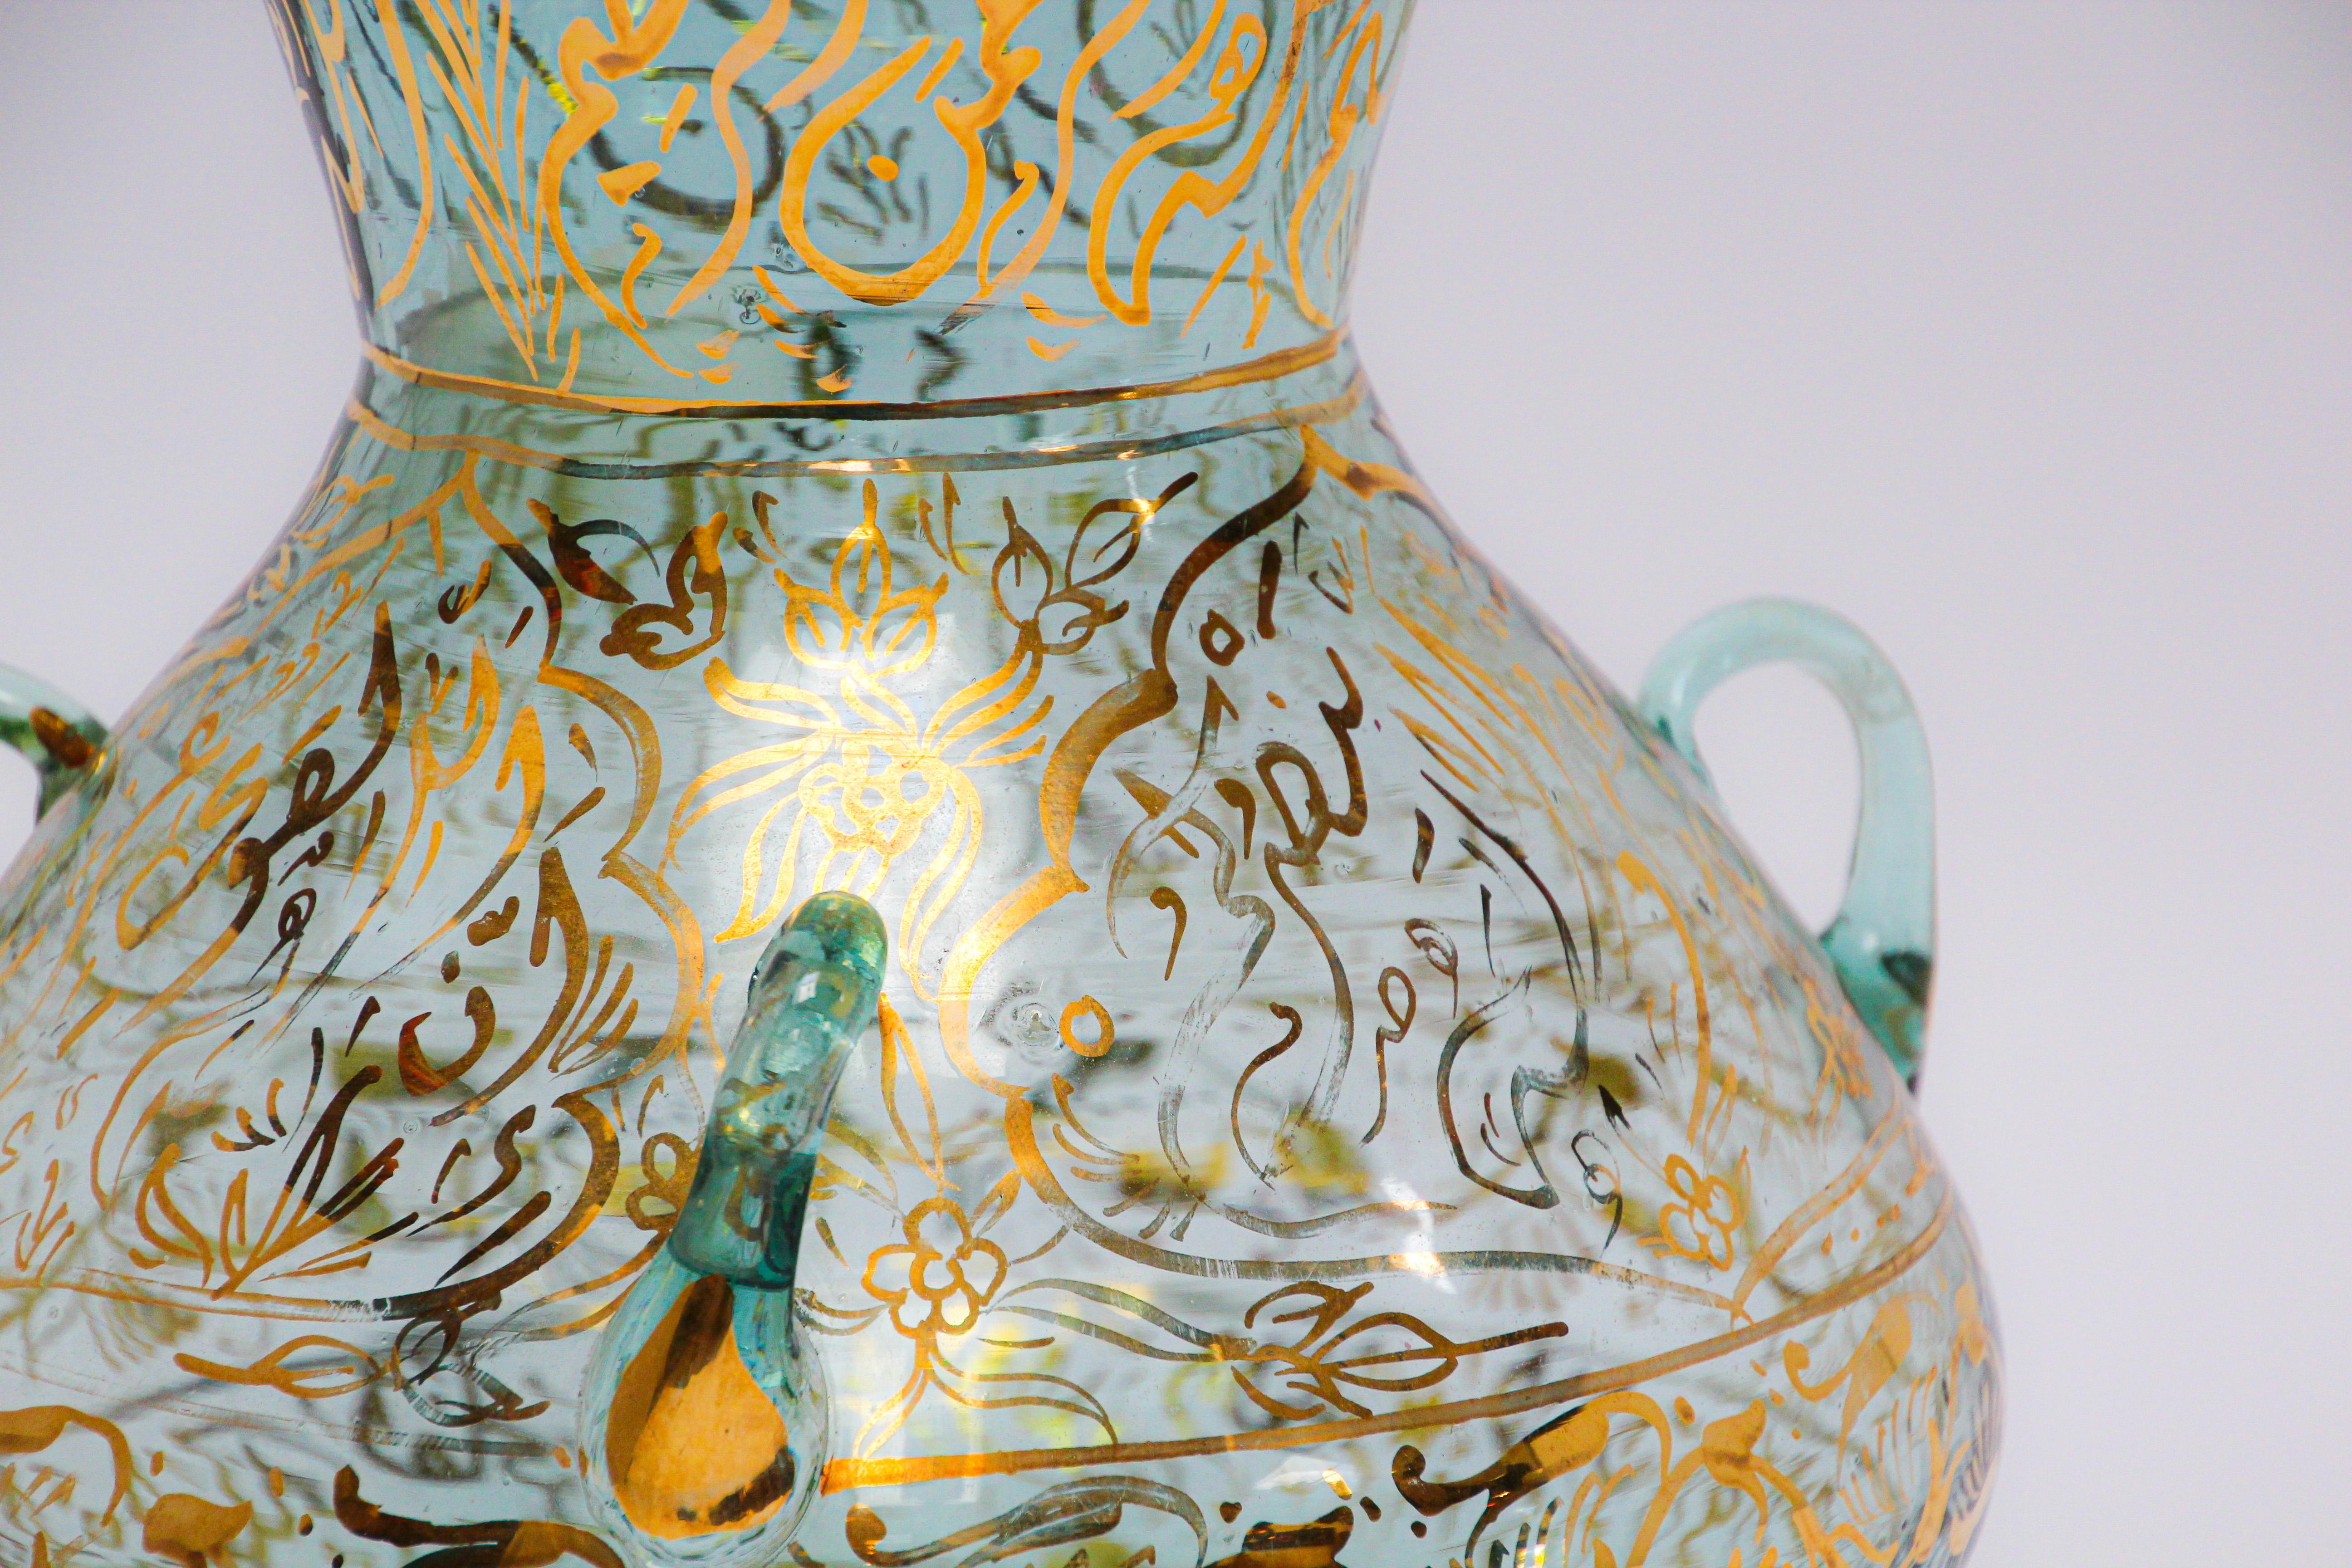 Gilt Handblown Mosque Glass Lamp in Mameluke Style Gilded with Arabic Calligraphy